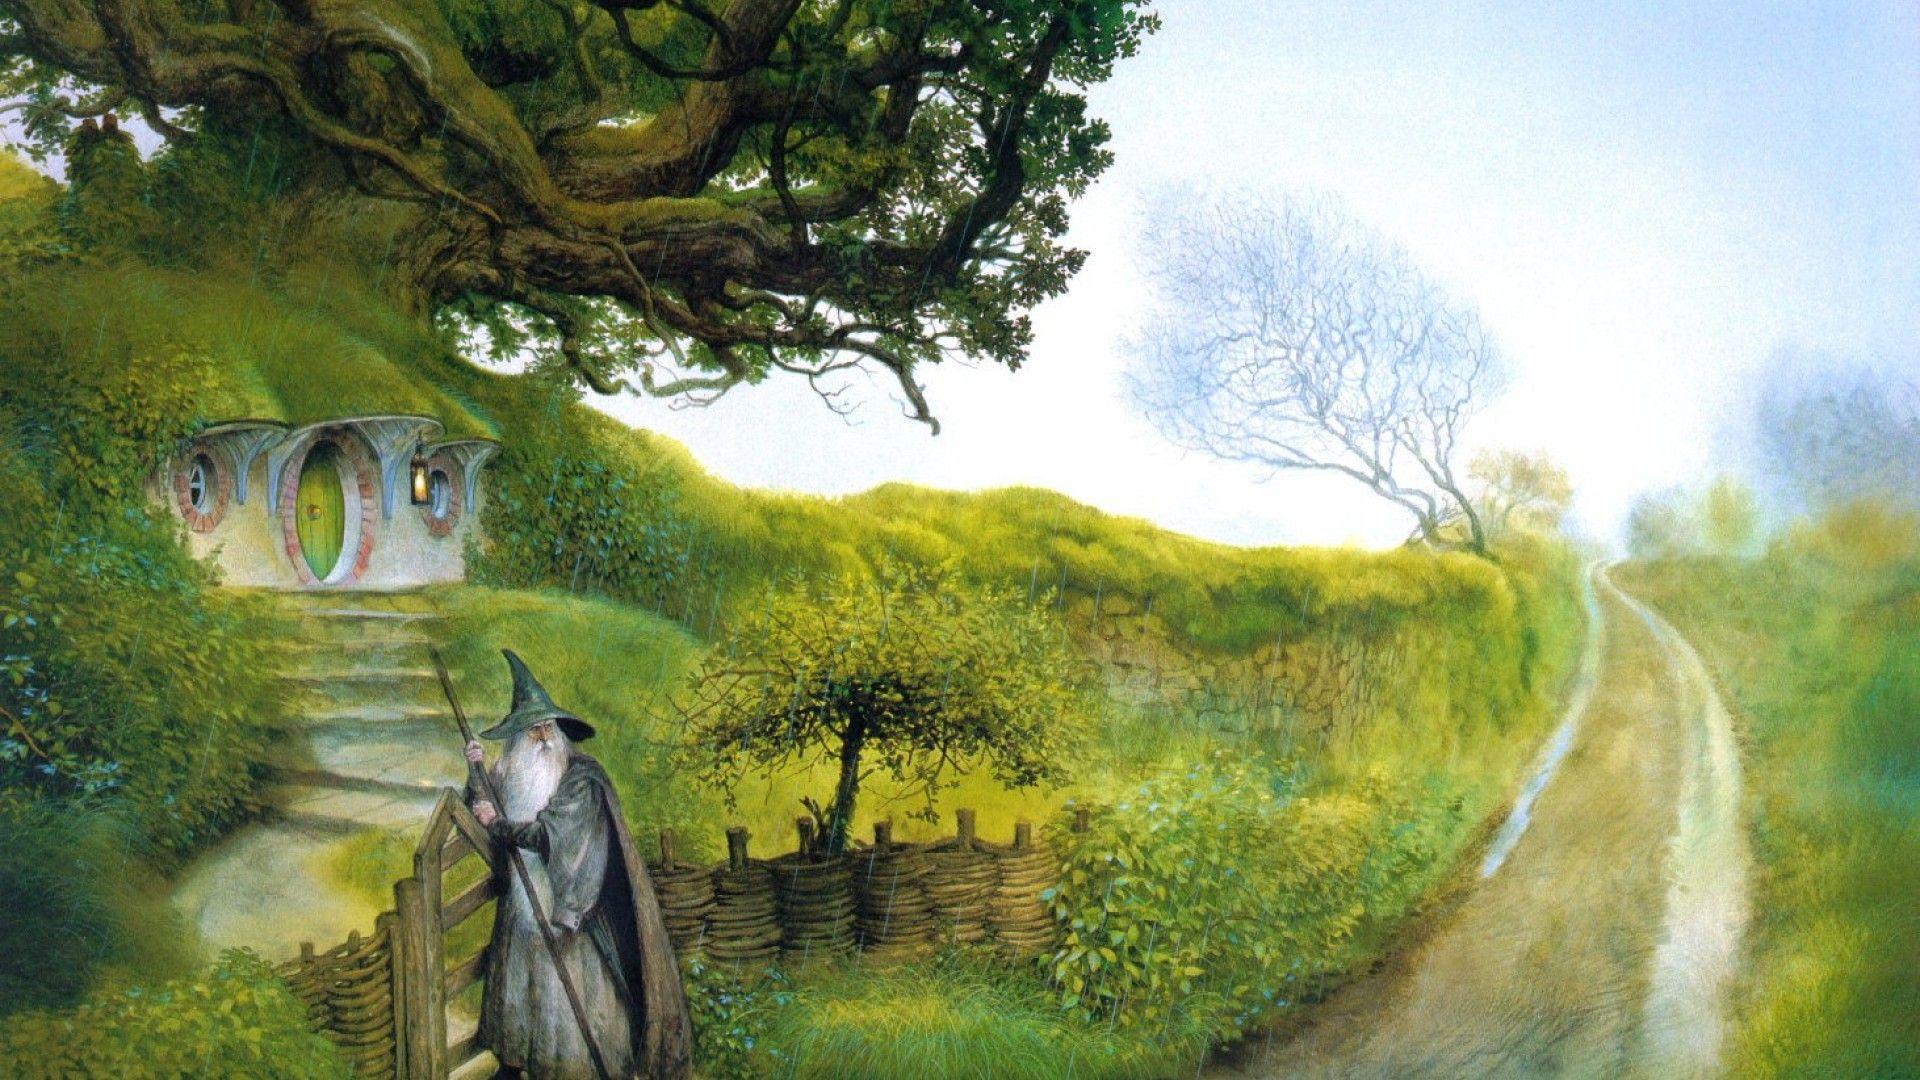 Gandalf arriving in the Shire  Lord of the rings The hobbit Fellowship  of the ring